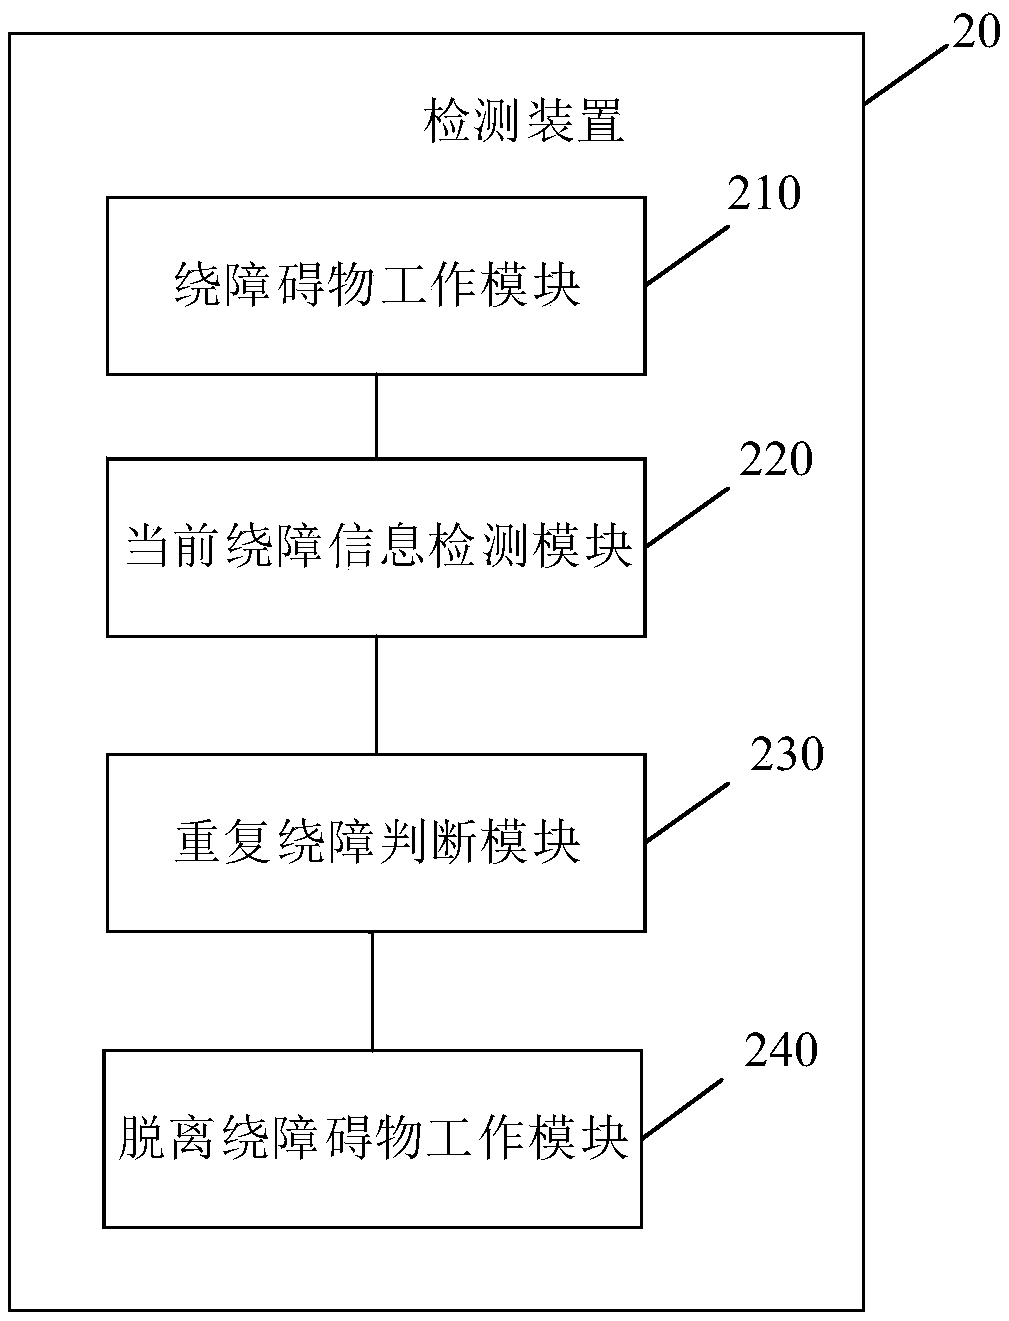 Repeated obstacle avoidance detection method and device, electronic equipment and readable storage medium